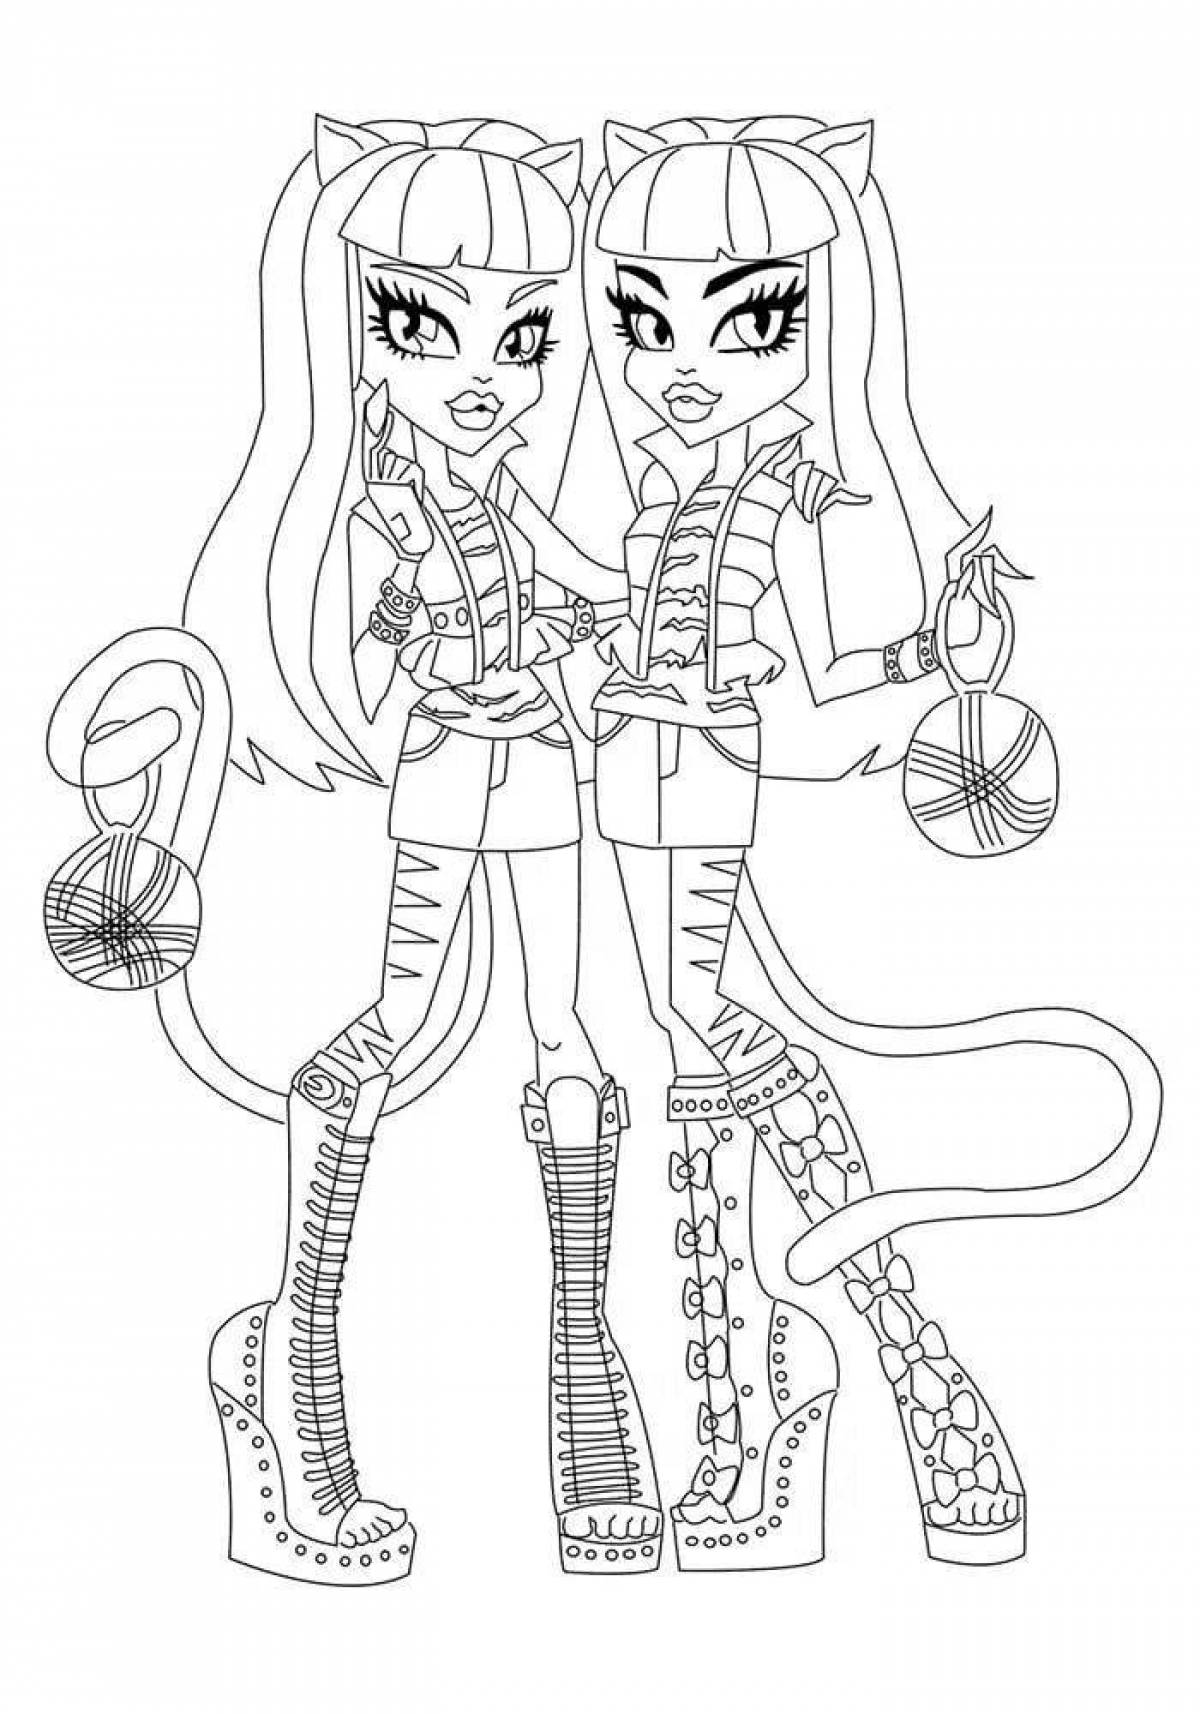 Exquisite monster high girls coloring book